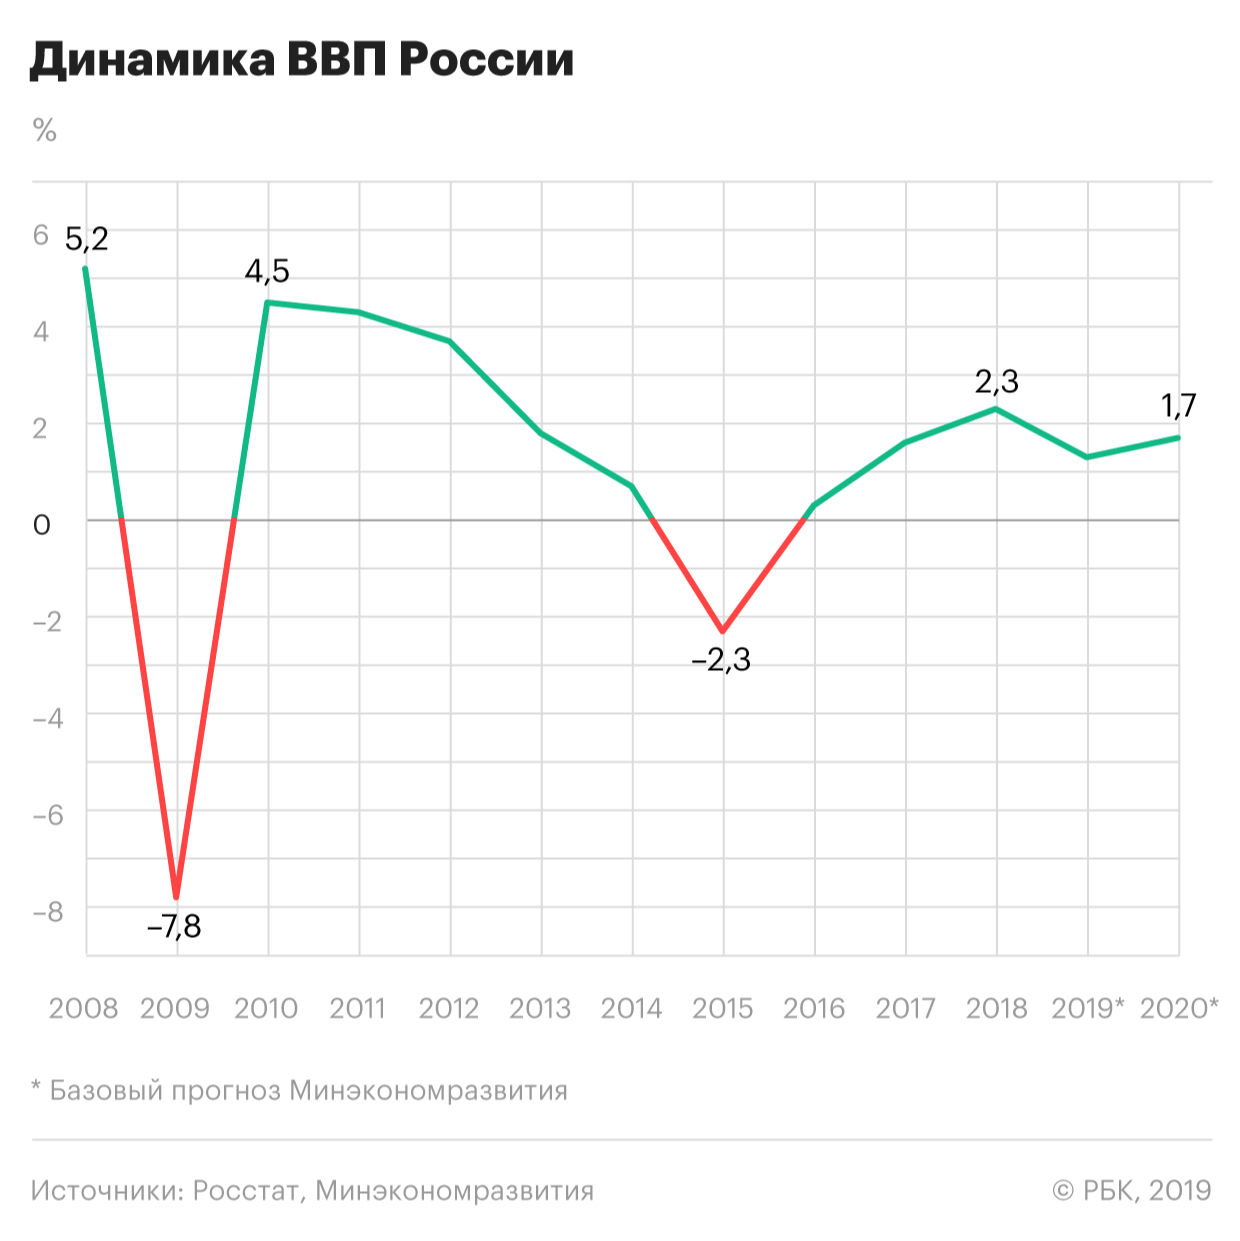 Рф 2008 2012